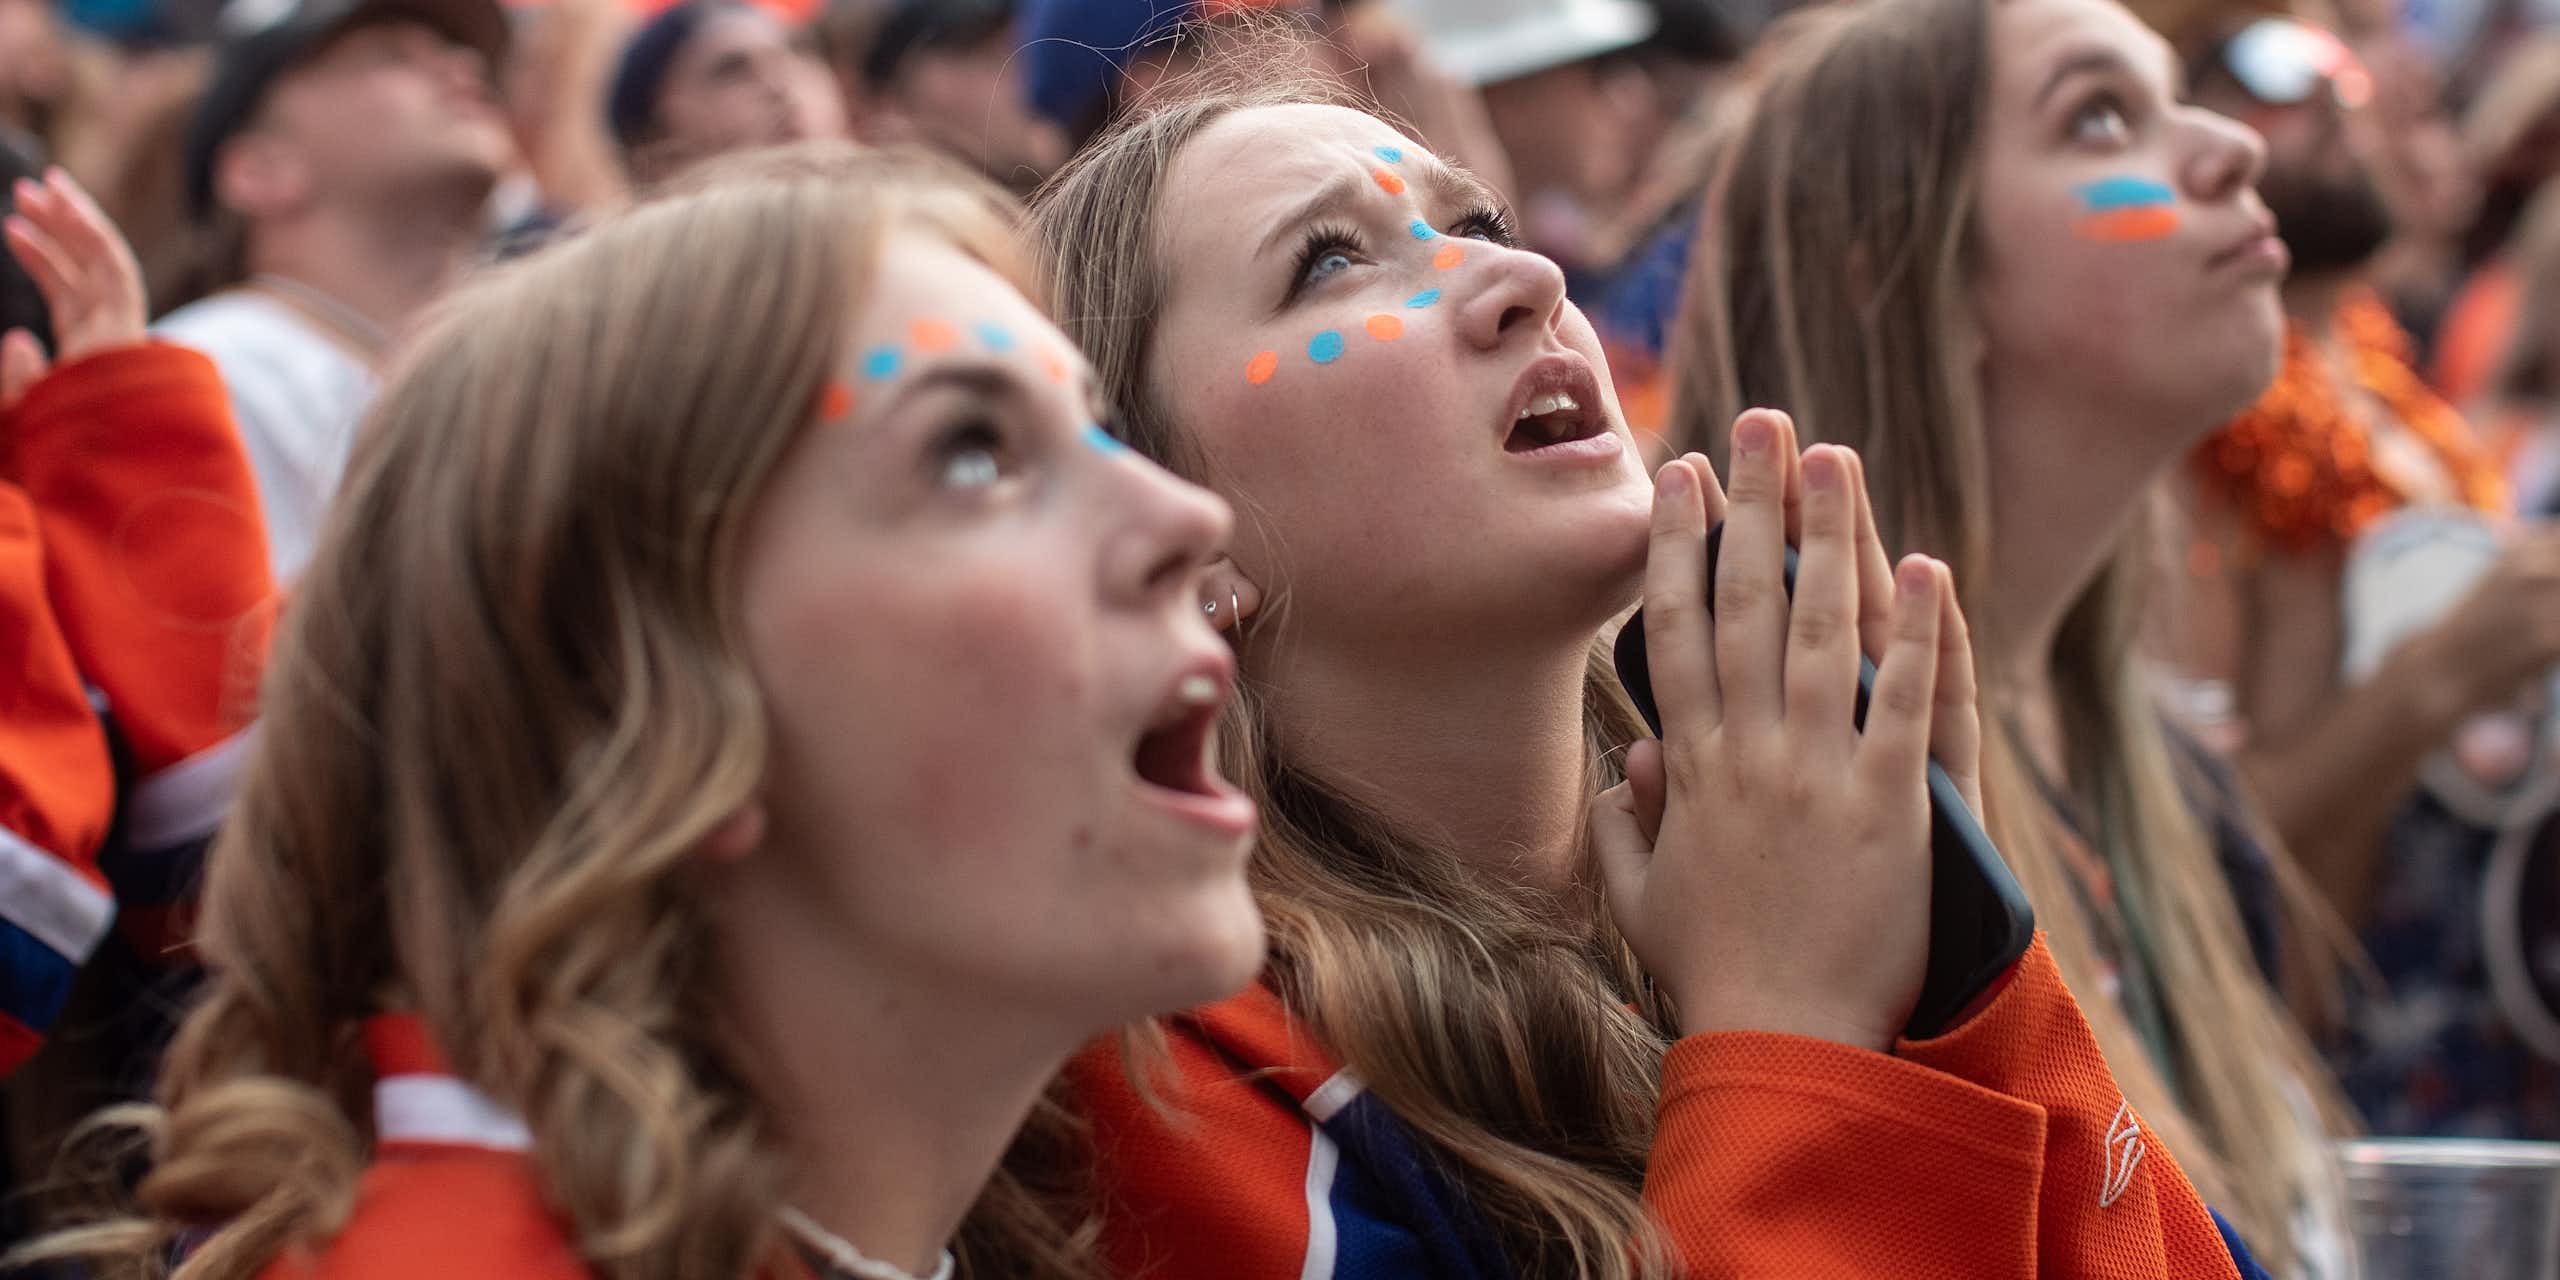 Three women in Edmonton jerseys look up, with one appearing to be praying.